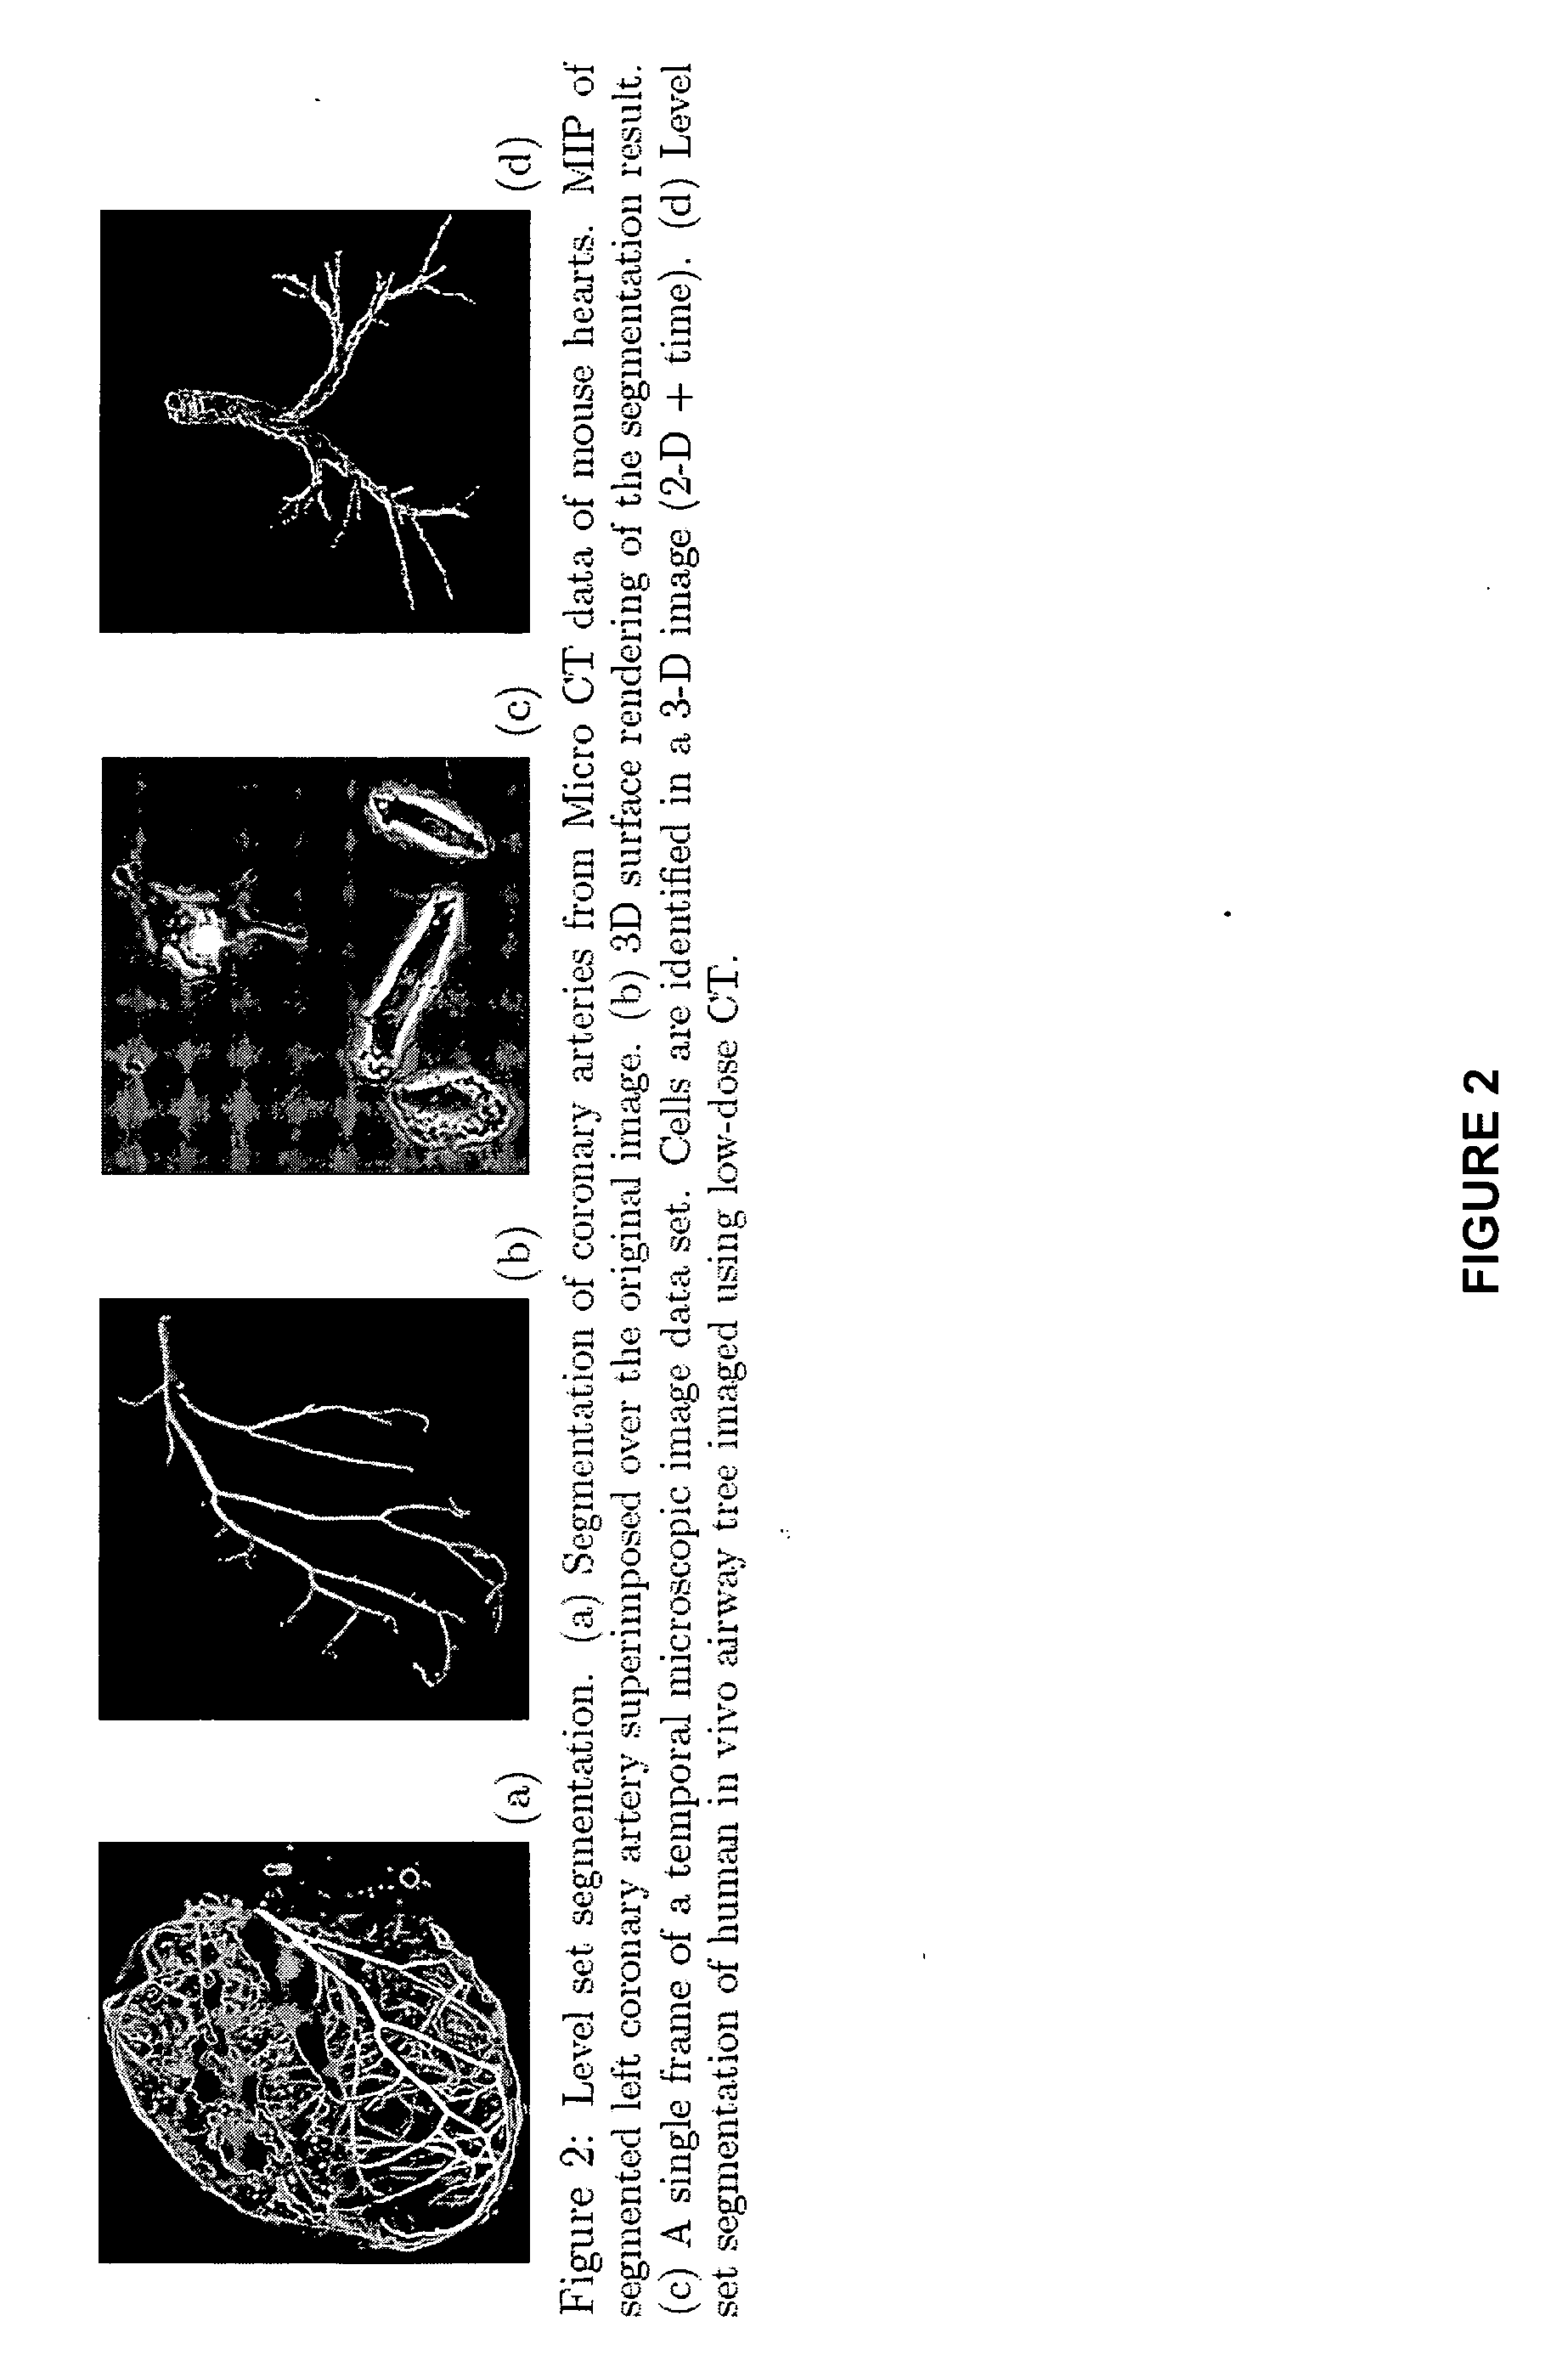 System and methods for image segmentation in n-dimensional space